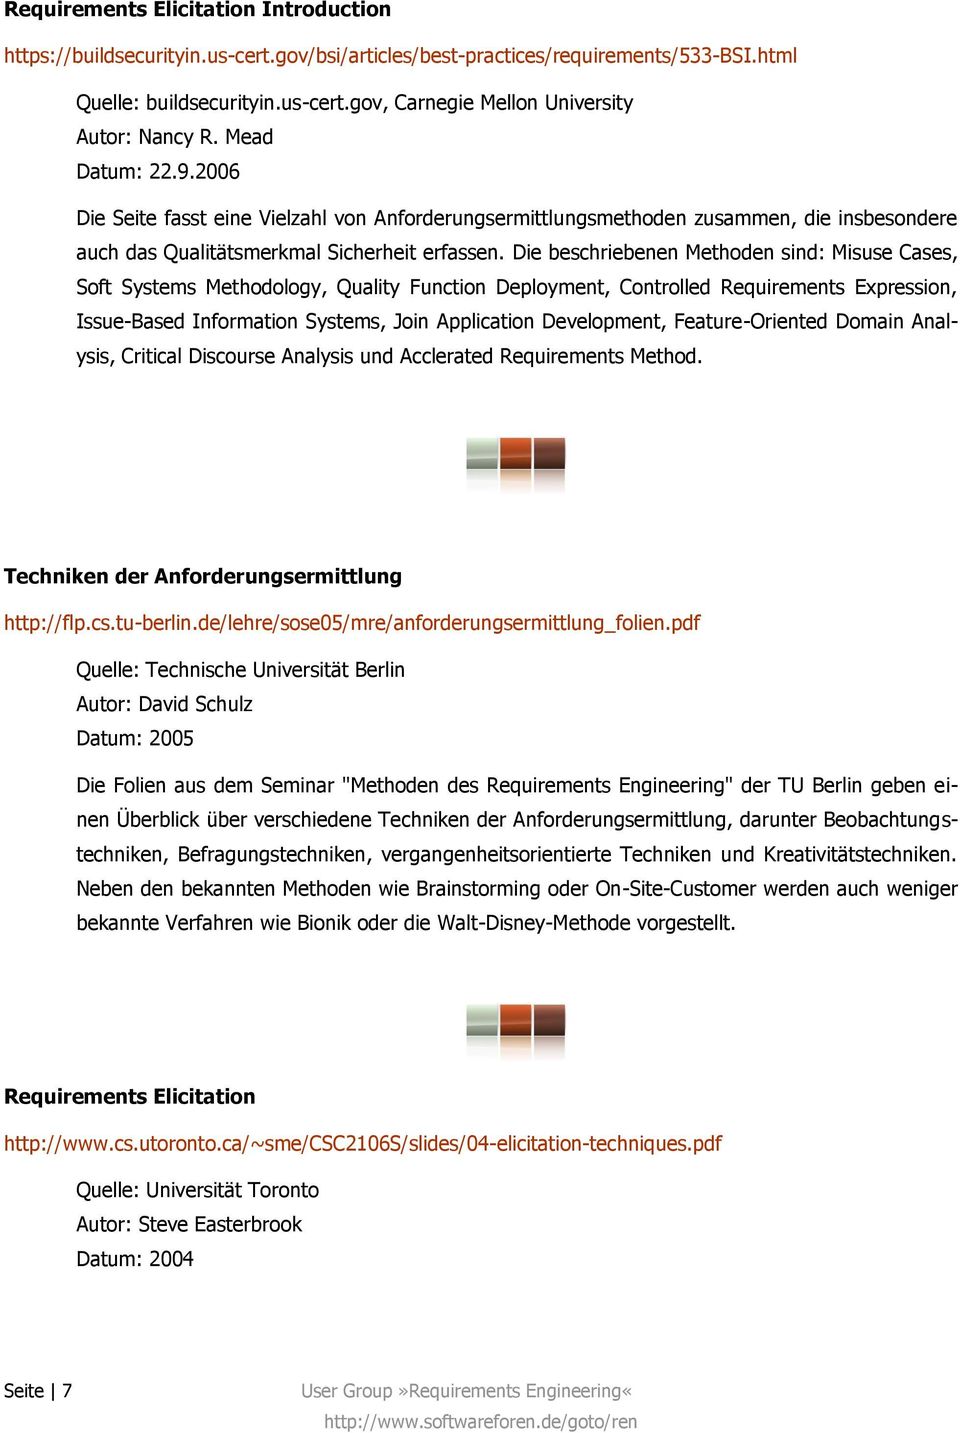 Die beschriebenen Methoden sind: Misuse Cases, Soft Systems Methodology, Quality Function Deployment, Controlled Requirements Expression, Issue-Based Information Systems, Join Application